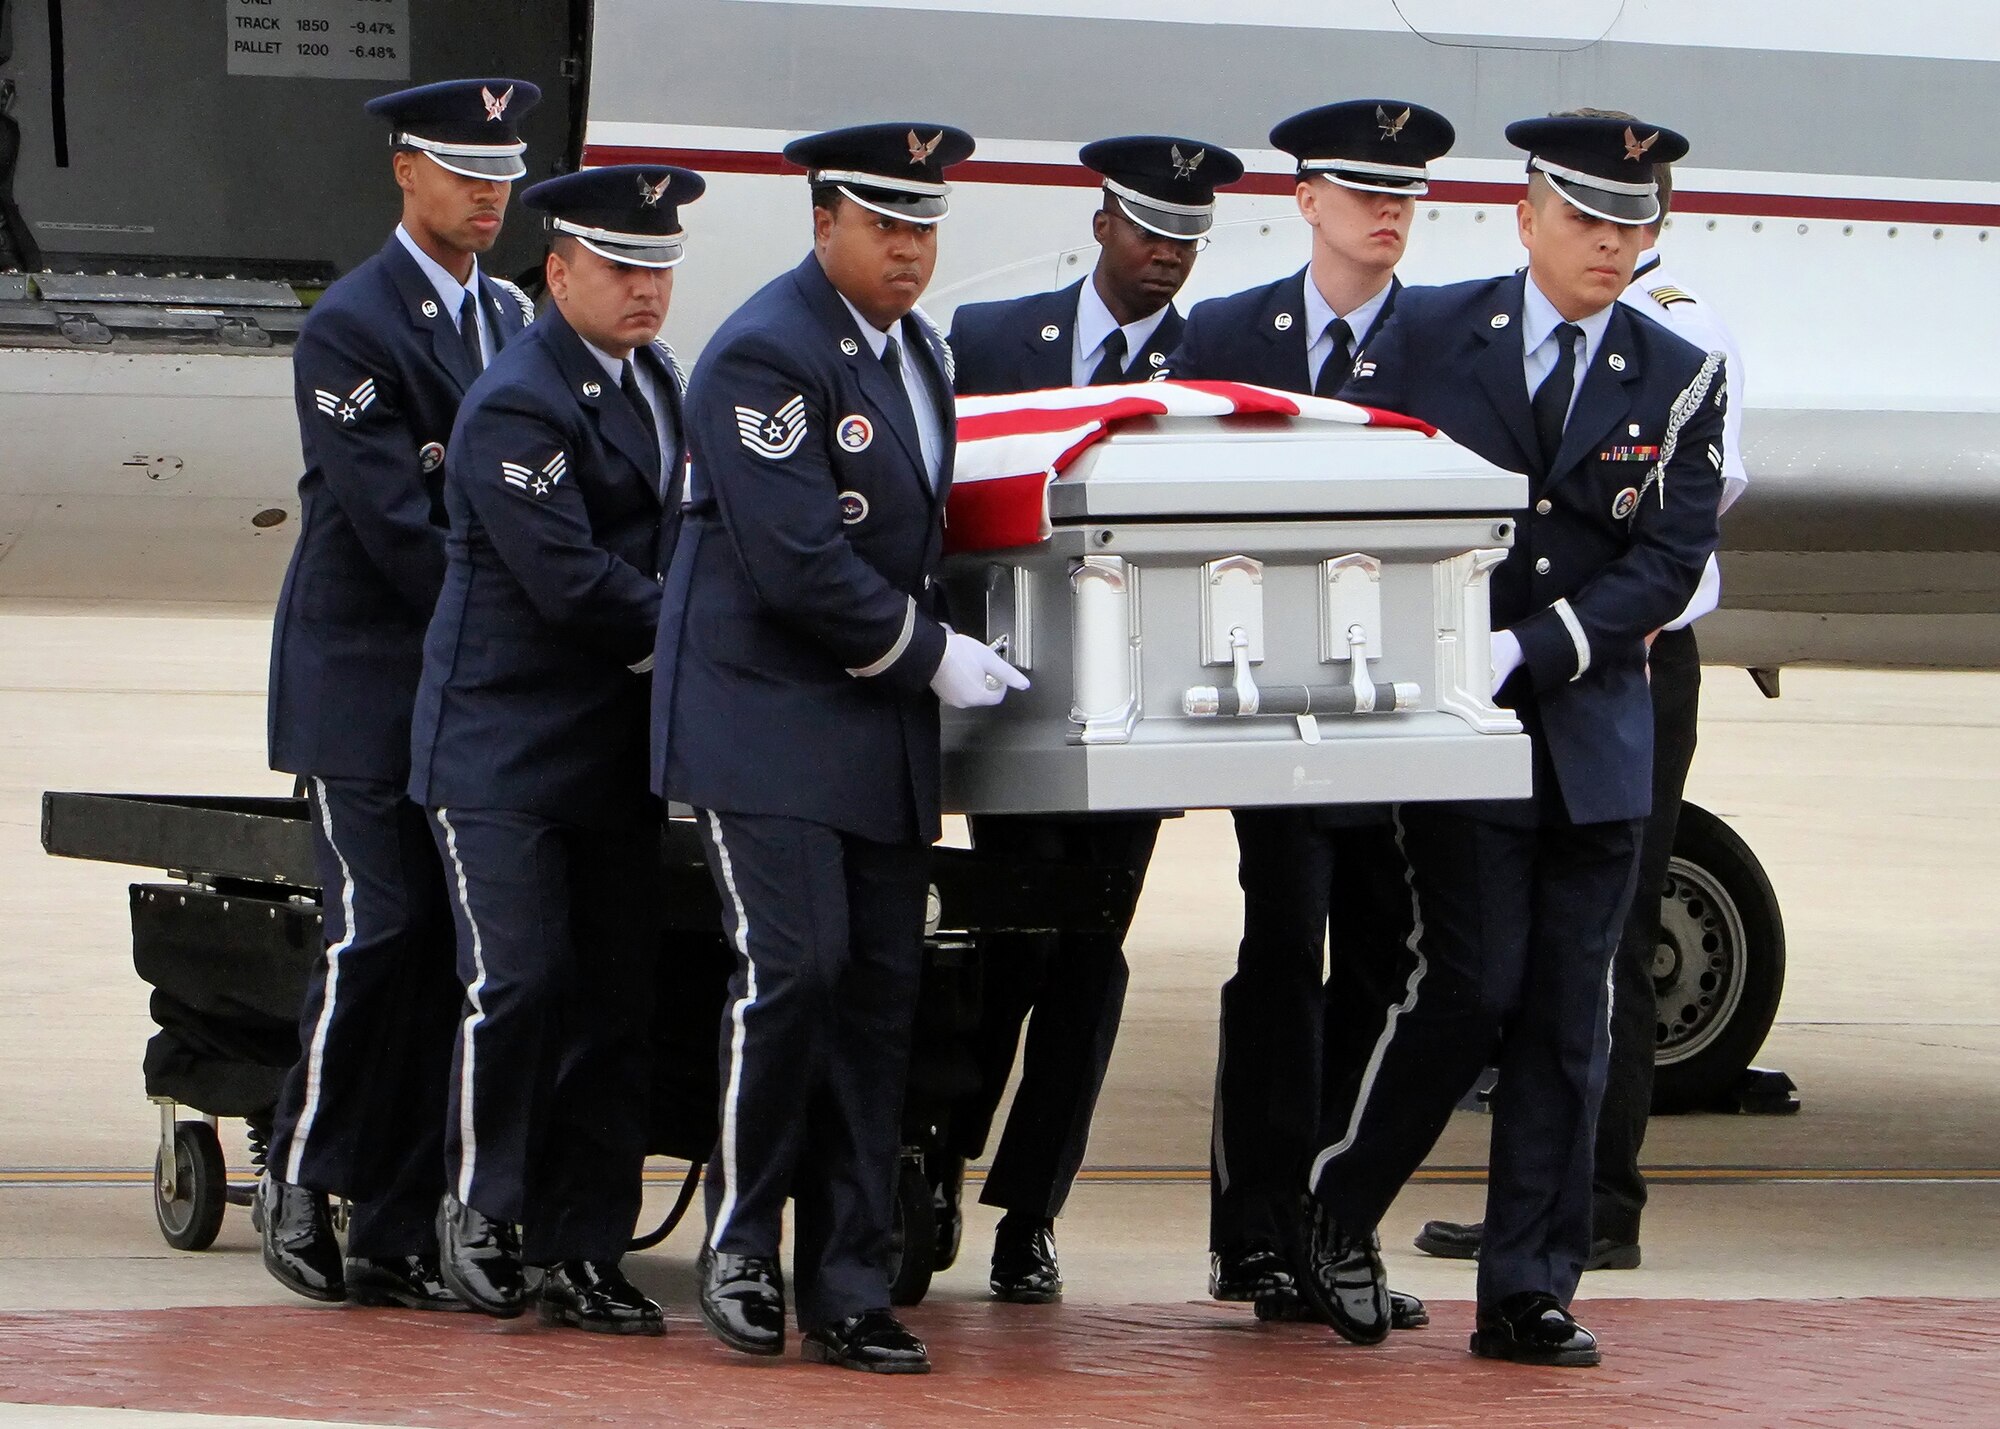 Members of the Lackland Air Force Base Honor Guard transfer the remains of Airman 1st Class Corey C. Owens at Lackland's Kelly Field flightline Feb. 24. Airman Owens died Feb. 17 during a deployment to Al Asad Air Base, Iraq, in support of Operation New Dawn. He was assigned to the 47th Security Forces Squadron, Laughlin Air Force Base, Texas. (U.S. Air Force photo/Tony Morano)  